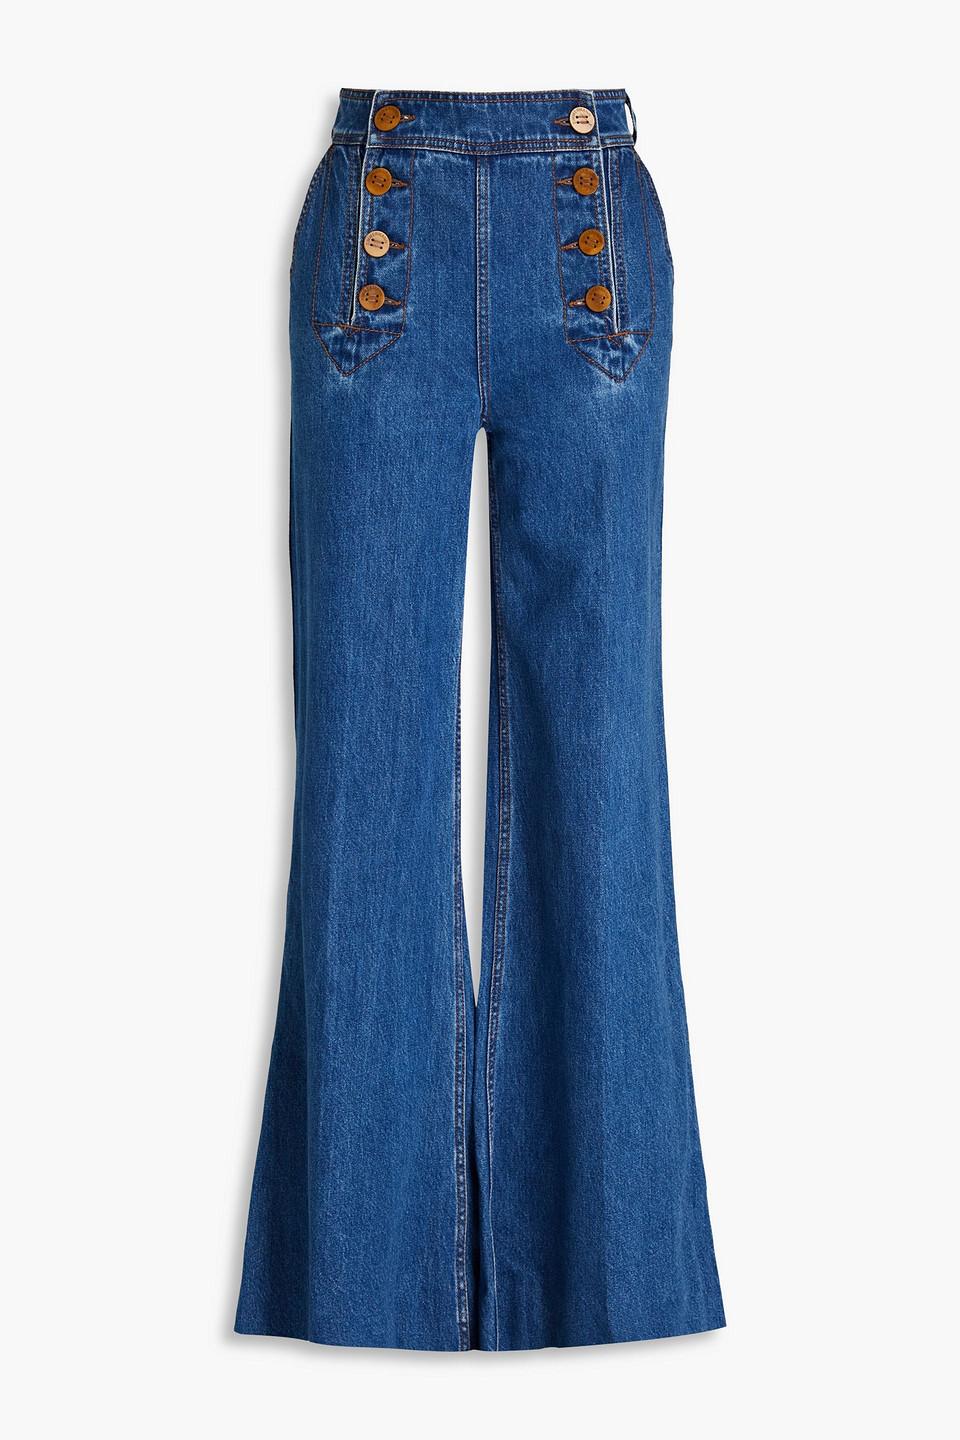 Zimmermann Postcard High-rise Flared Jeans in Blue | Lyst